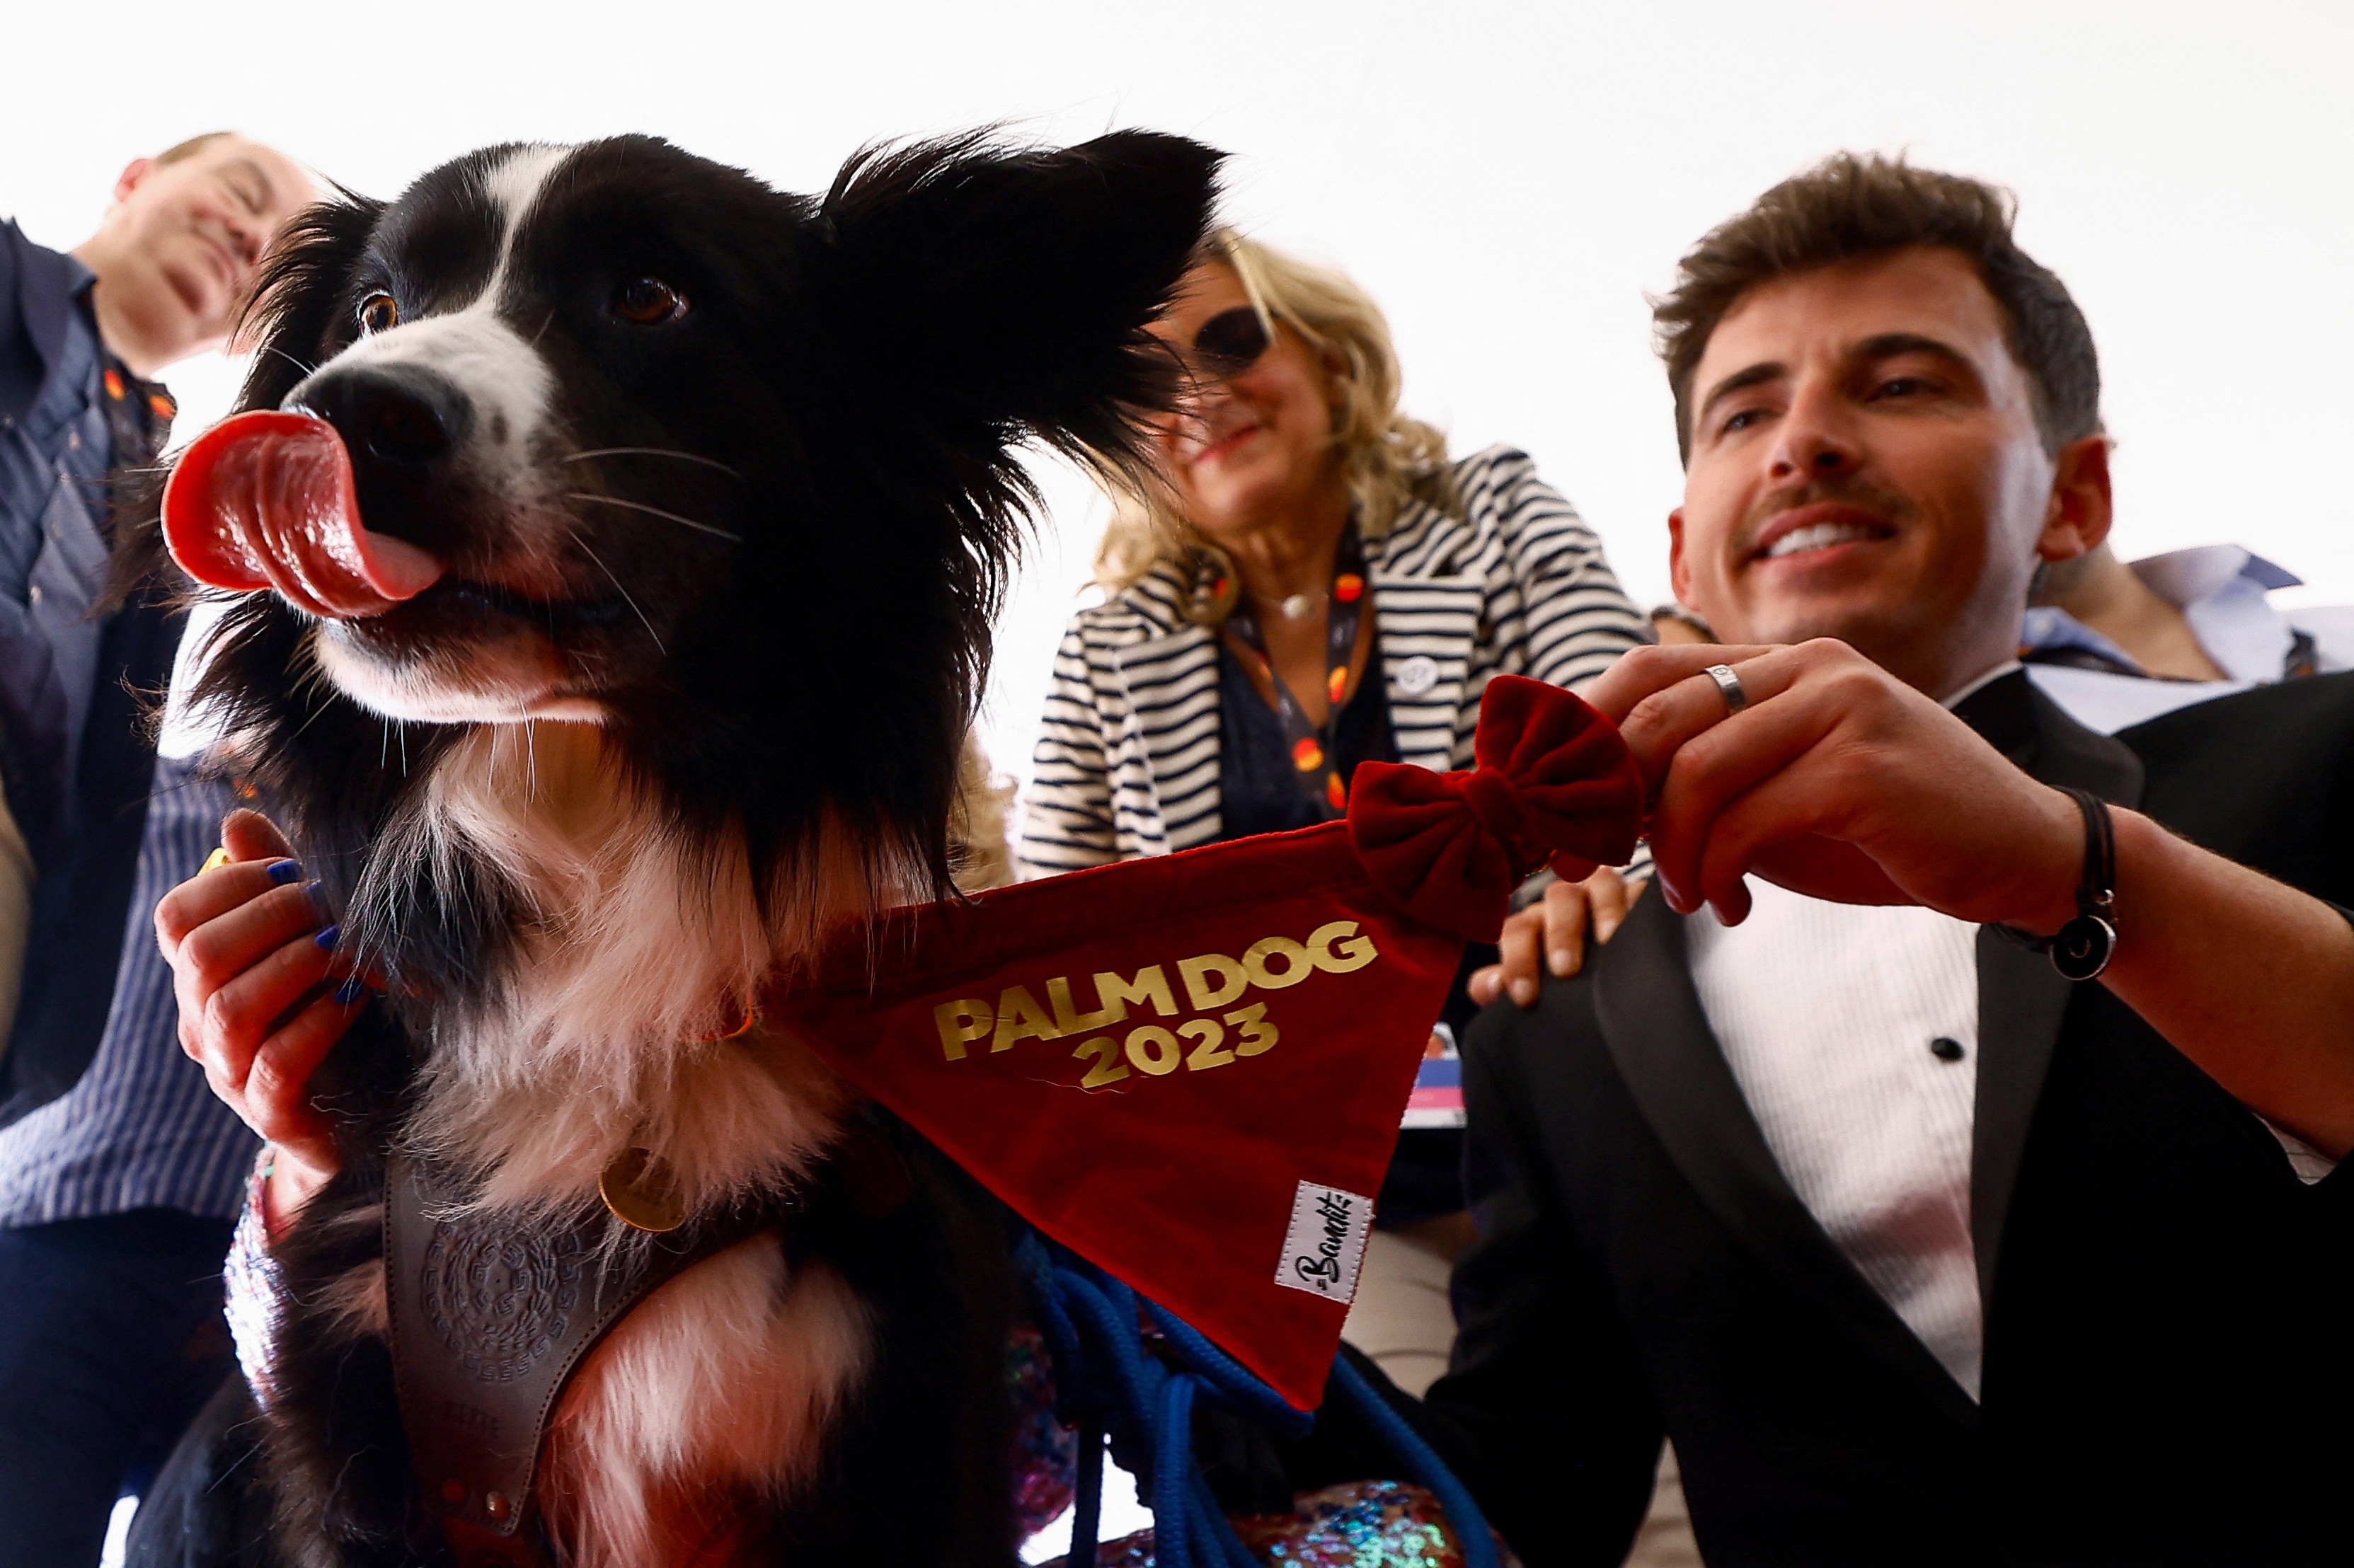 The 76th Cannes Film Festival - The Palm Dog Awards